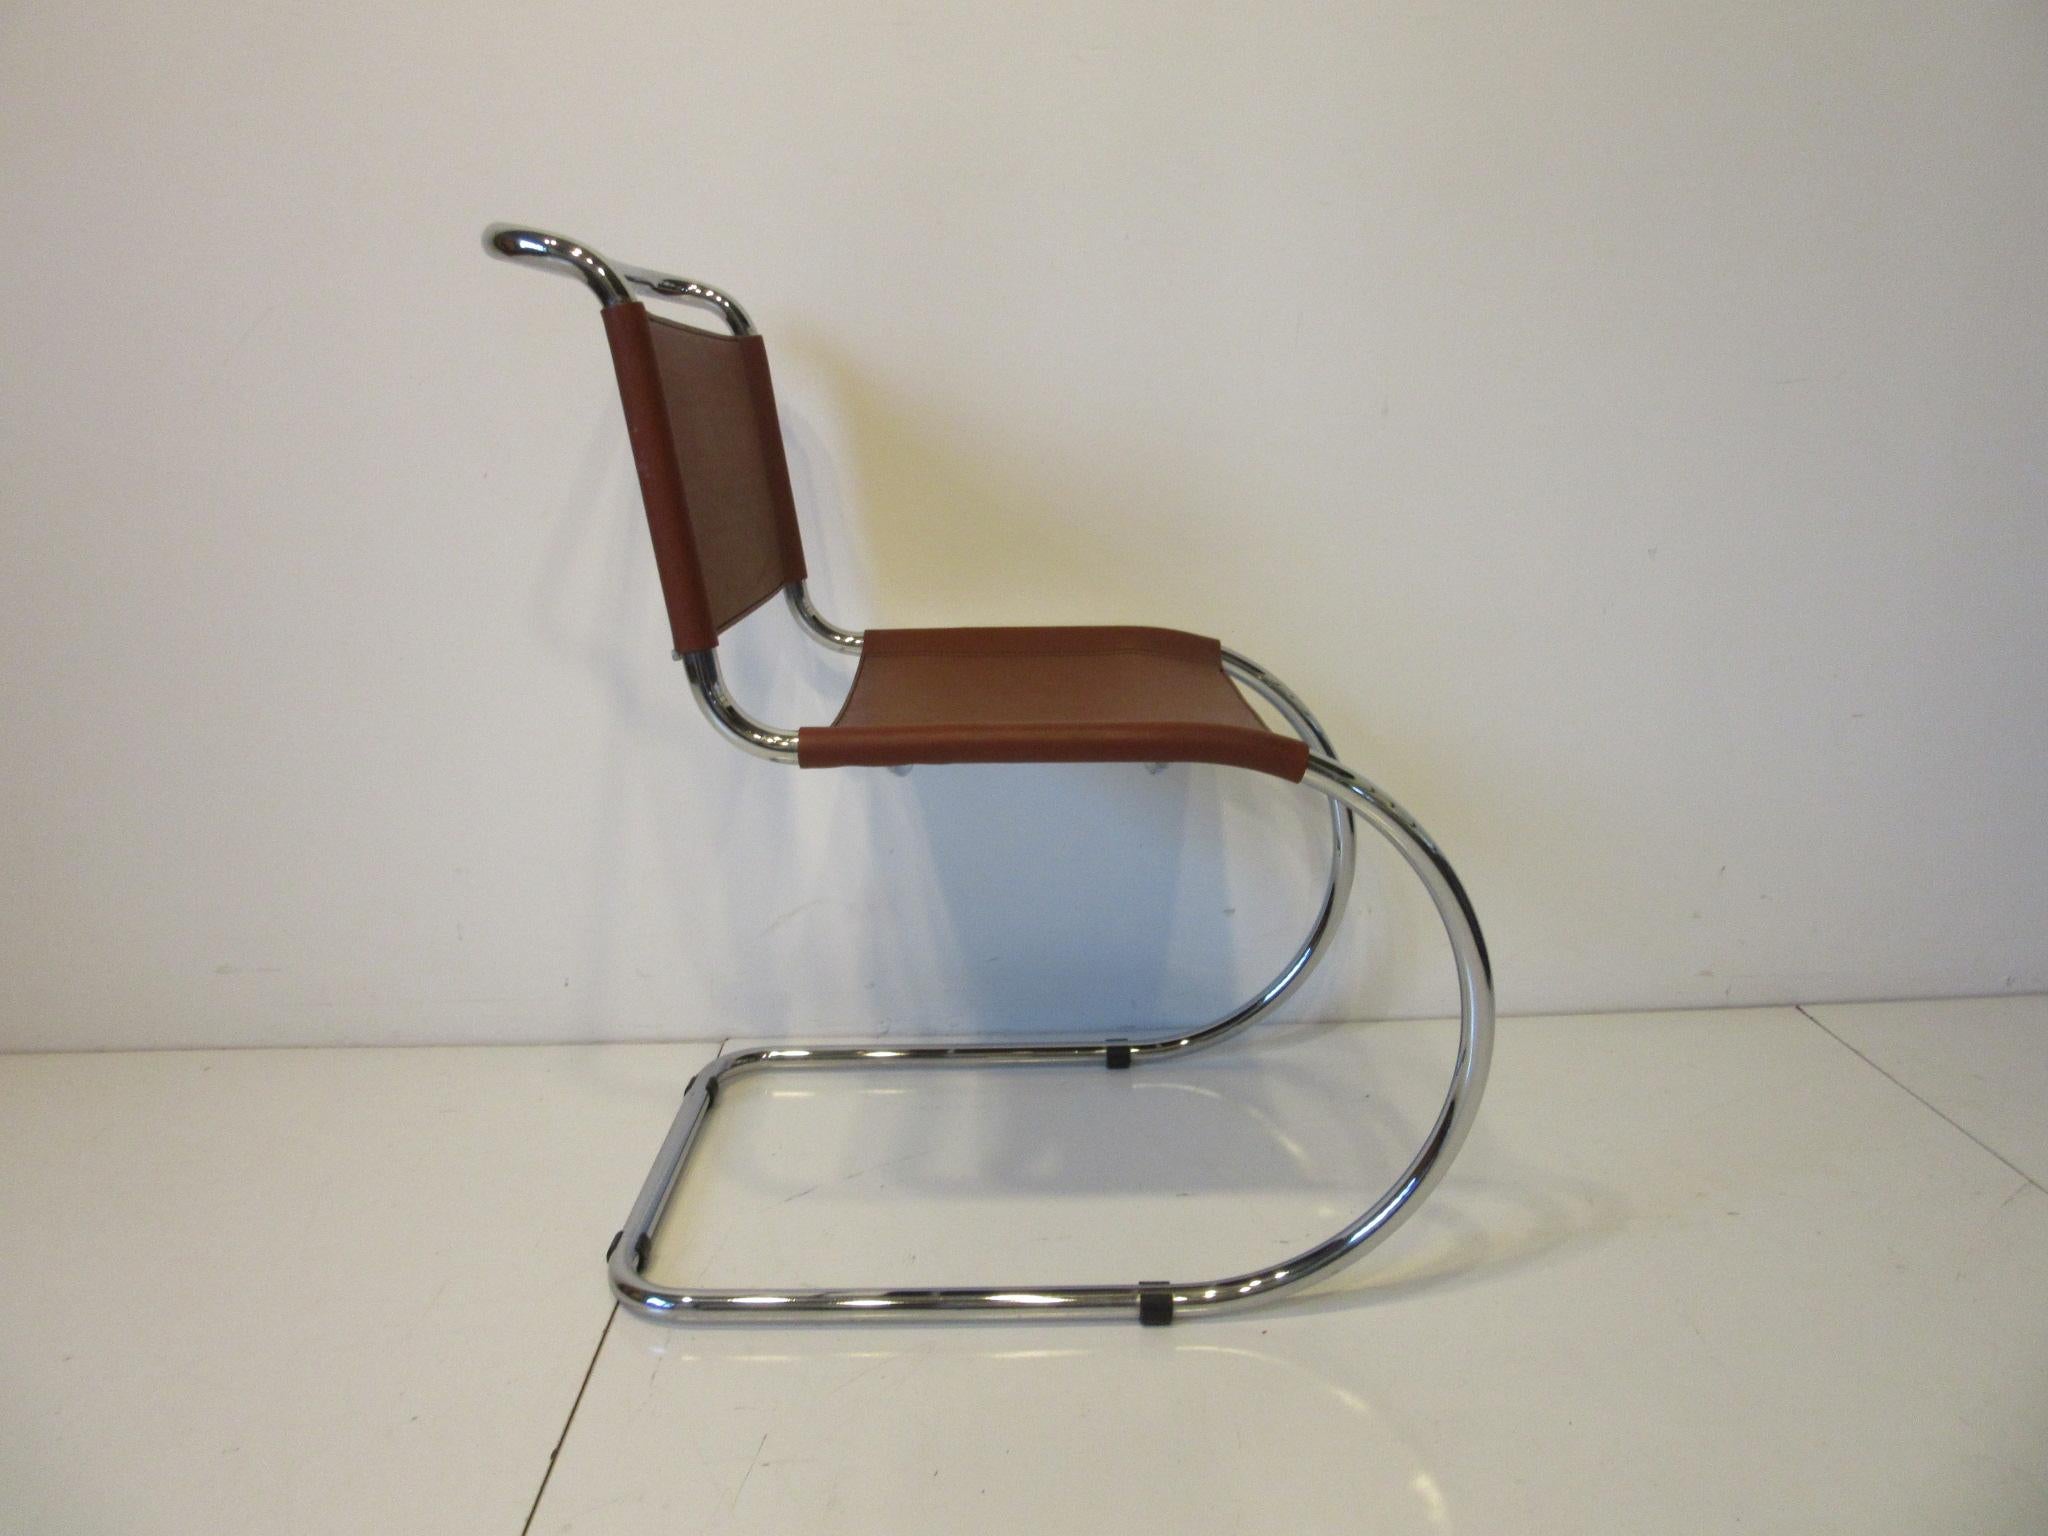 mies cantilever chair